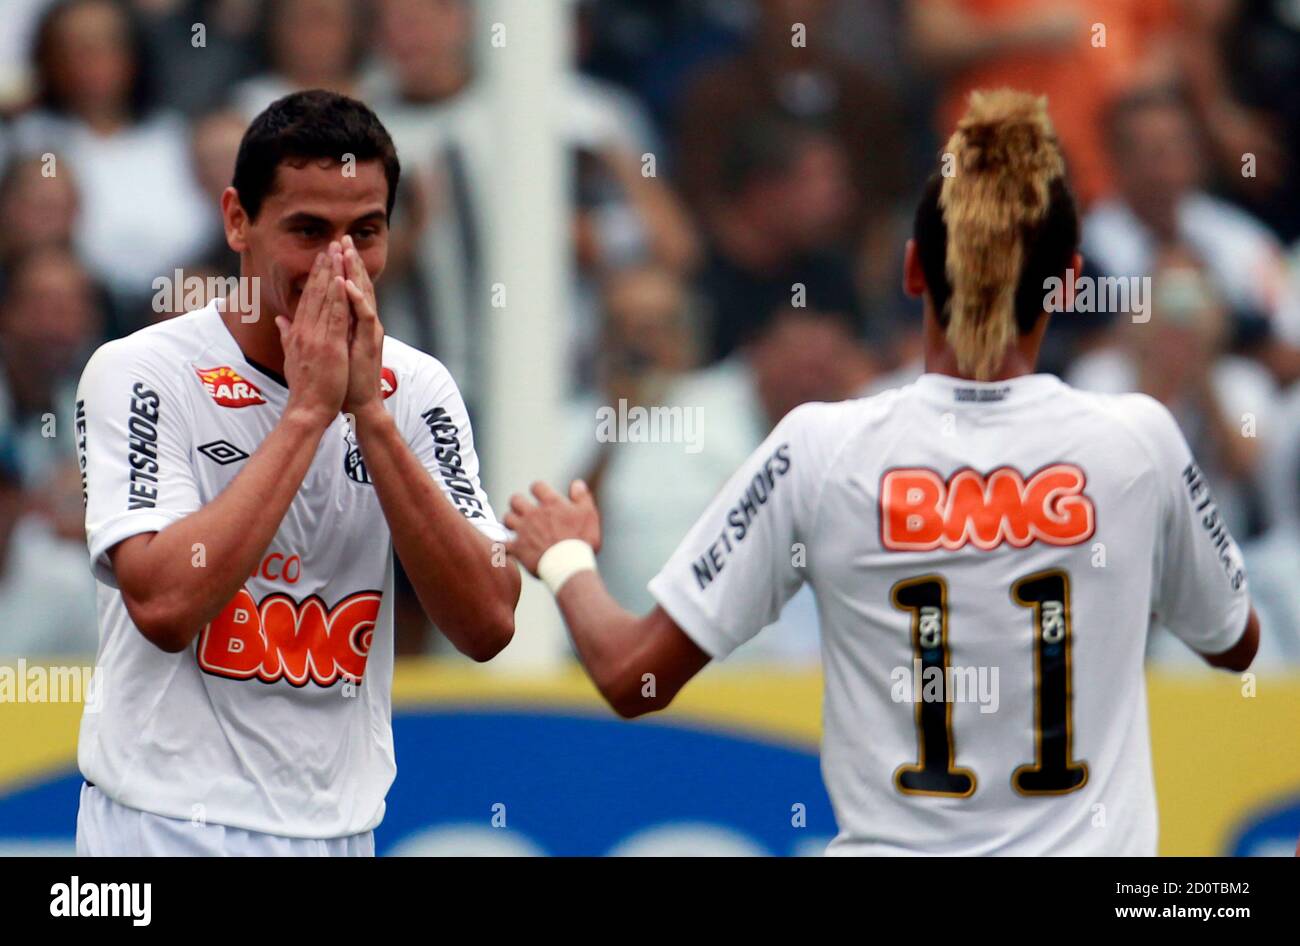 Ganso (L) of Santos reacts with teammmate Neymar during their Brazilian  championship soccer match against Vasco da Gama in Santos November 6, 2011.  REUTERS/Paulo Whitaker (BRAZIL - Tags: SPORT SOCCER Stock Photo - Alamy